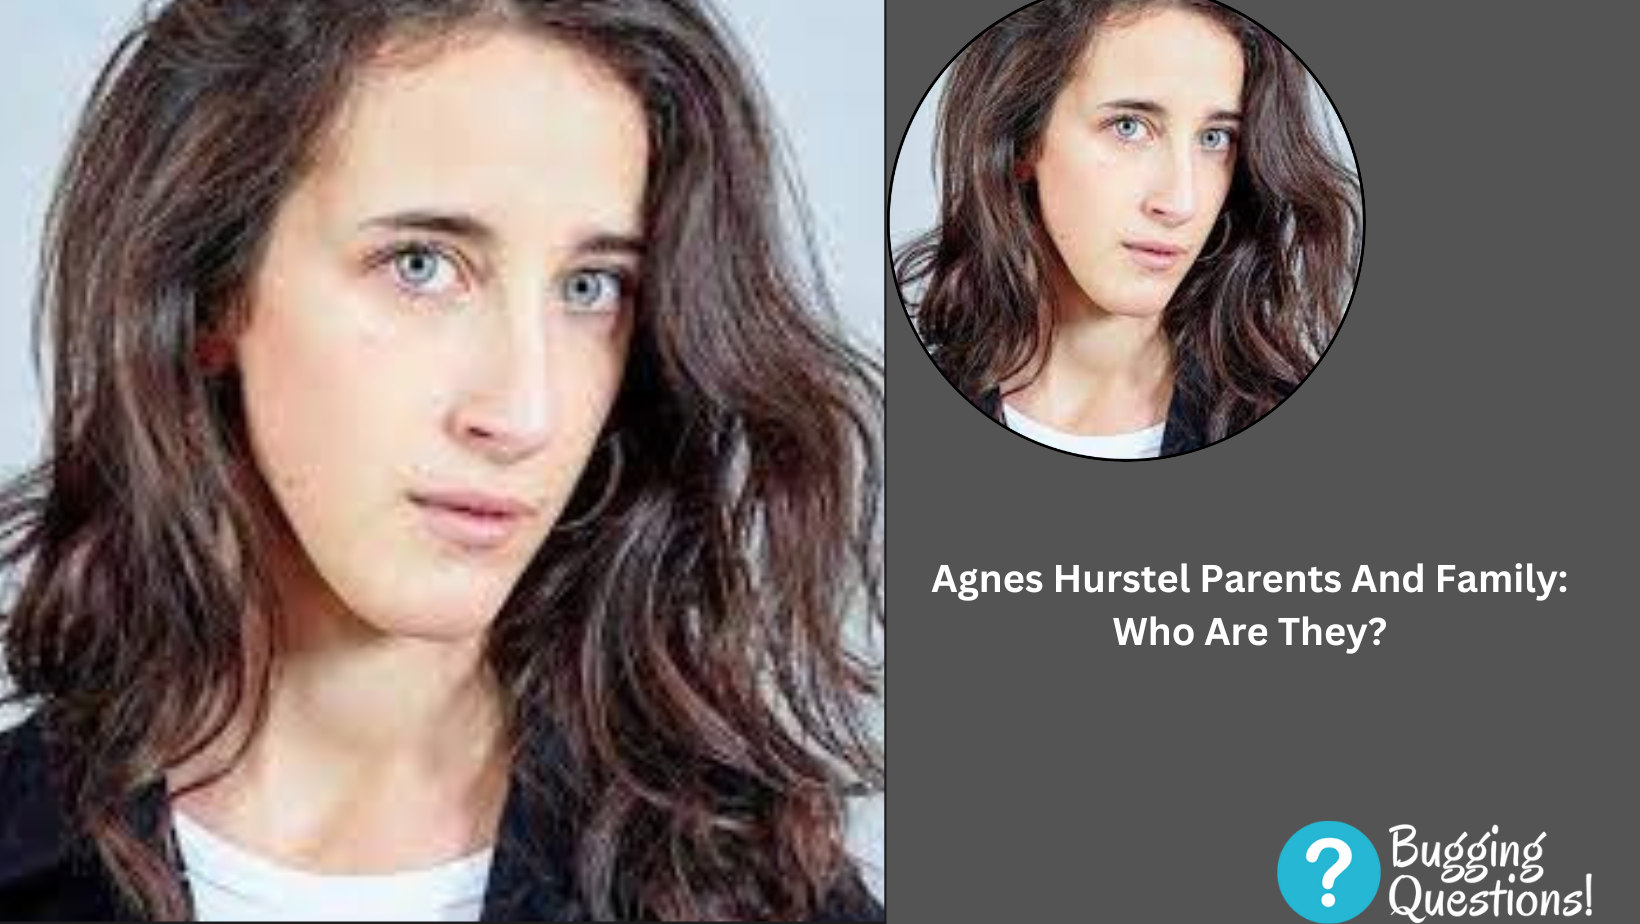 Agnes Hurstel Parents And Family: Who Are They?